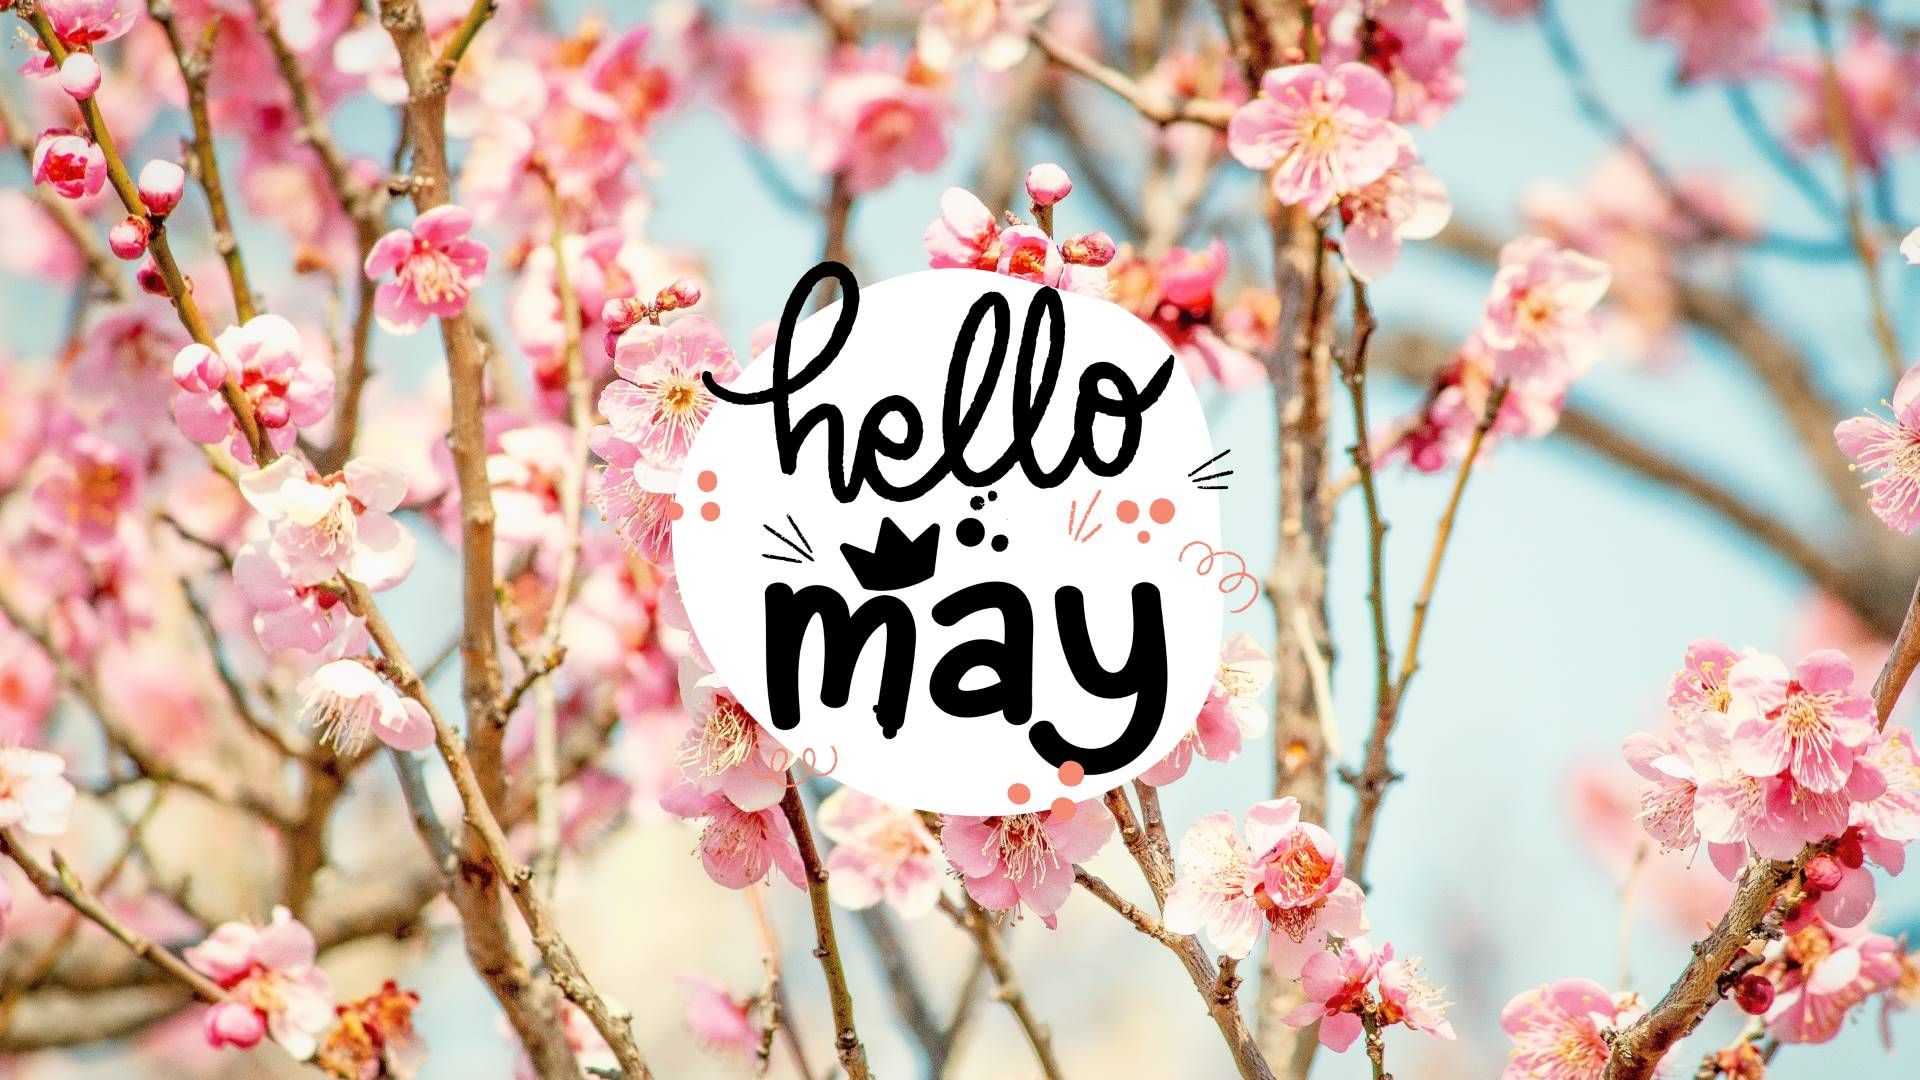 Hello May, wallpaper, flowers, pink, may, spring, wallpaper, background, season, 1920x1080, HD, high definition, 1080p - May